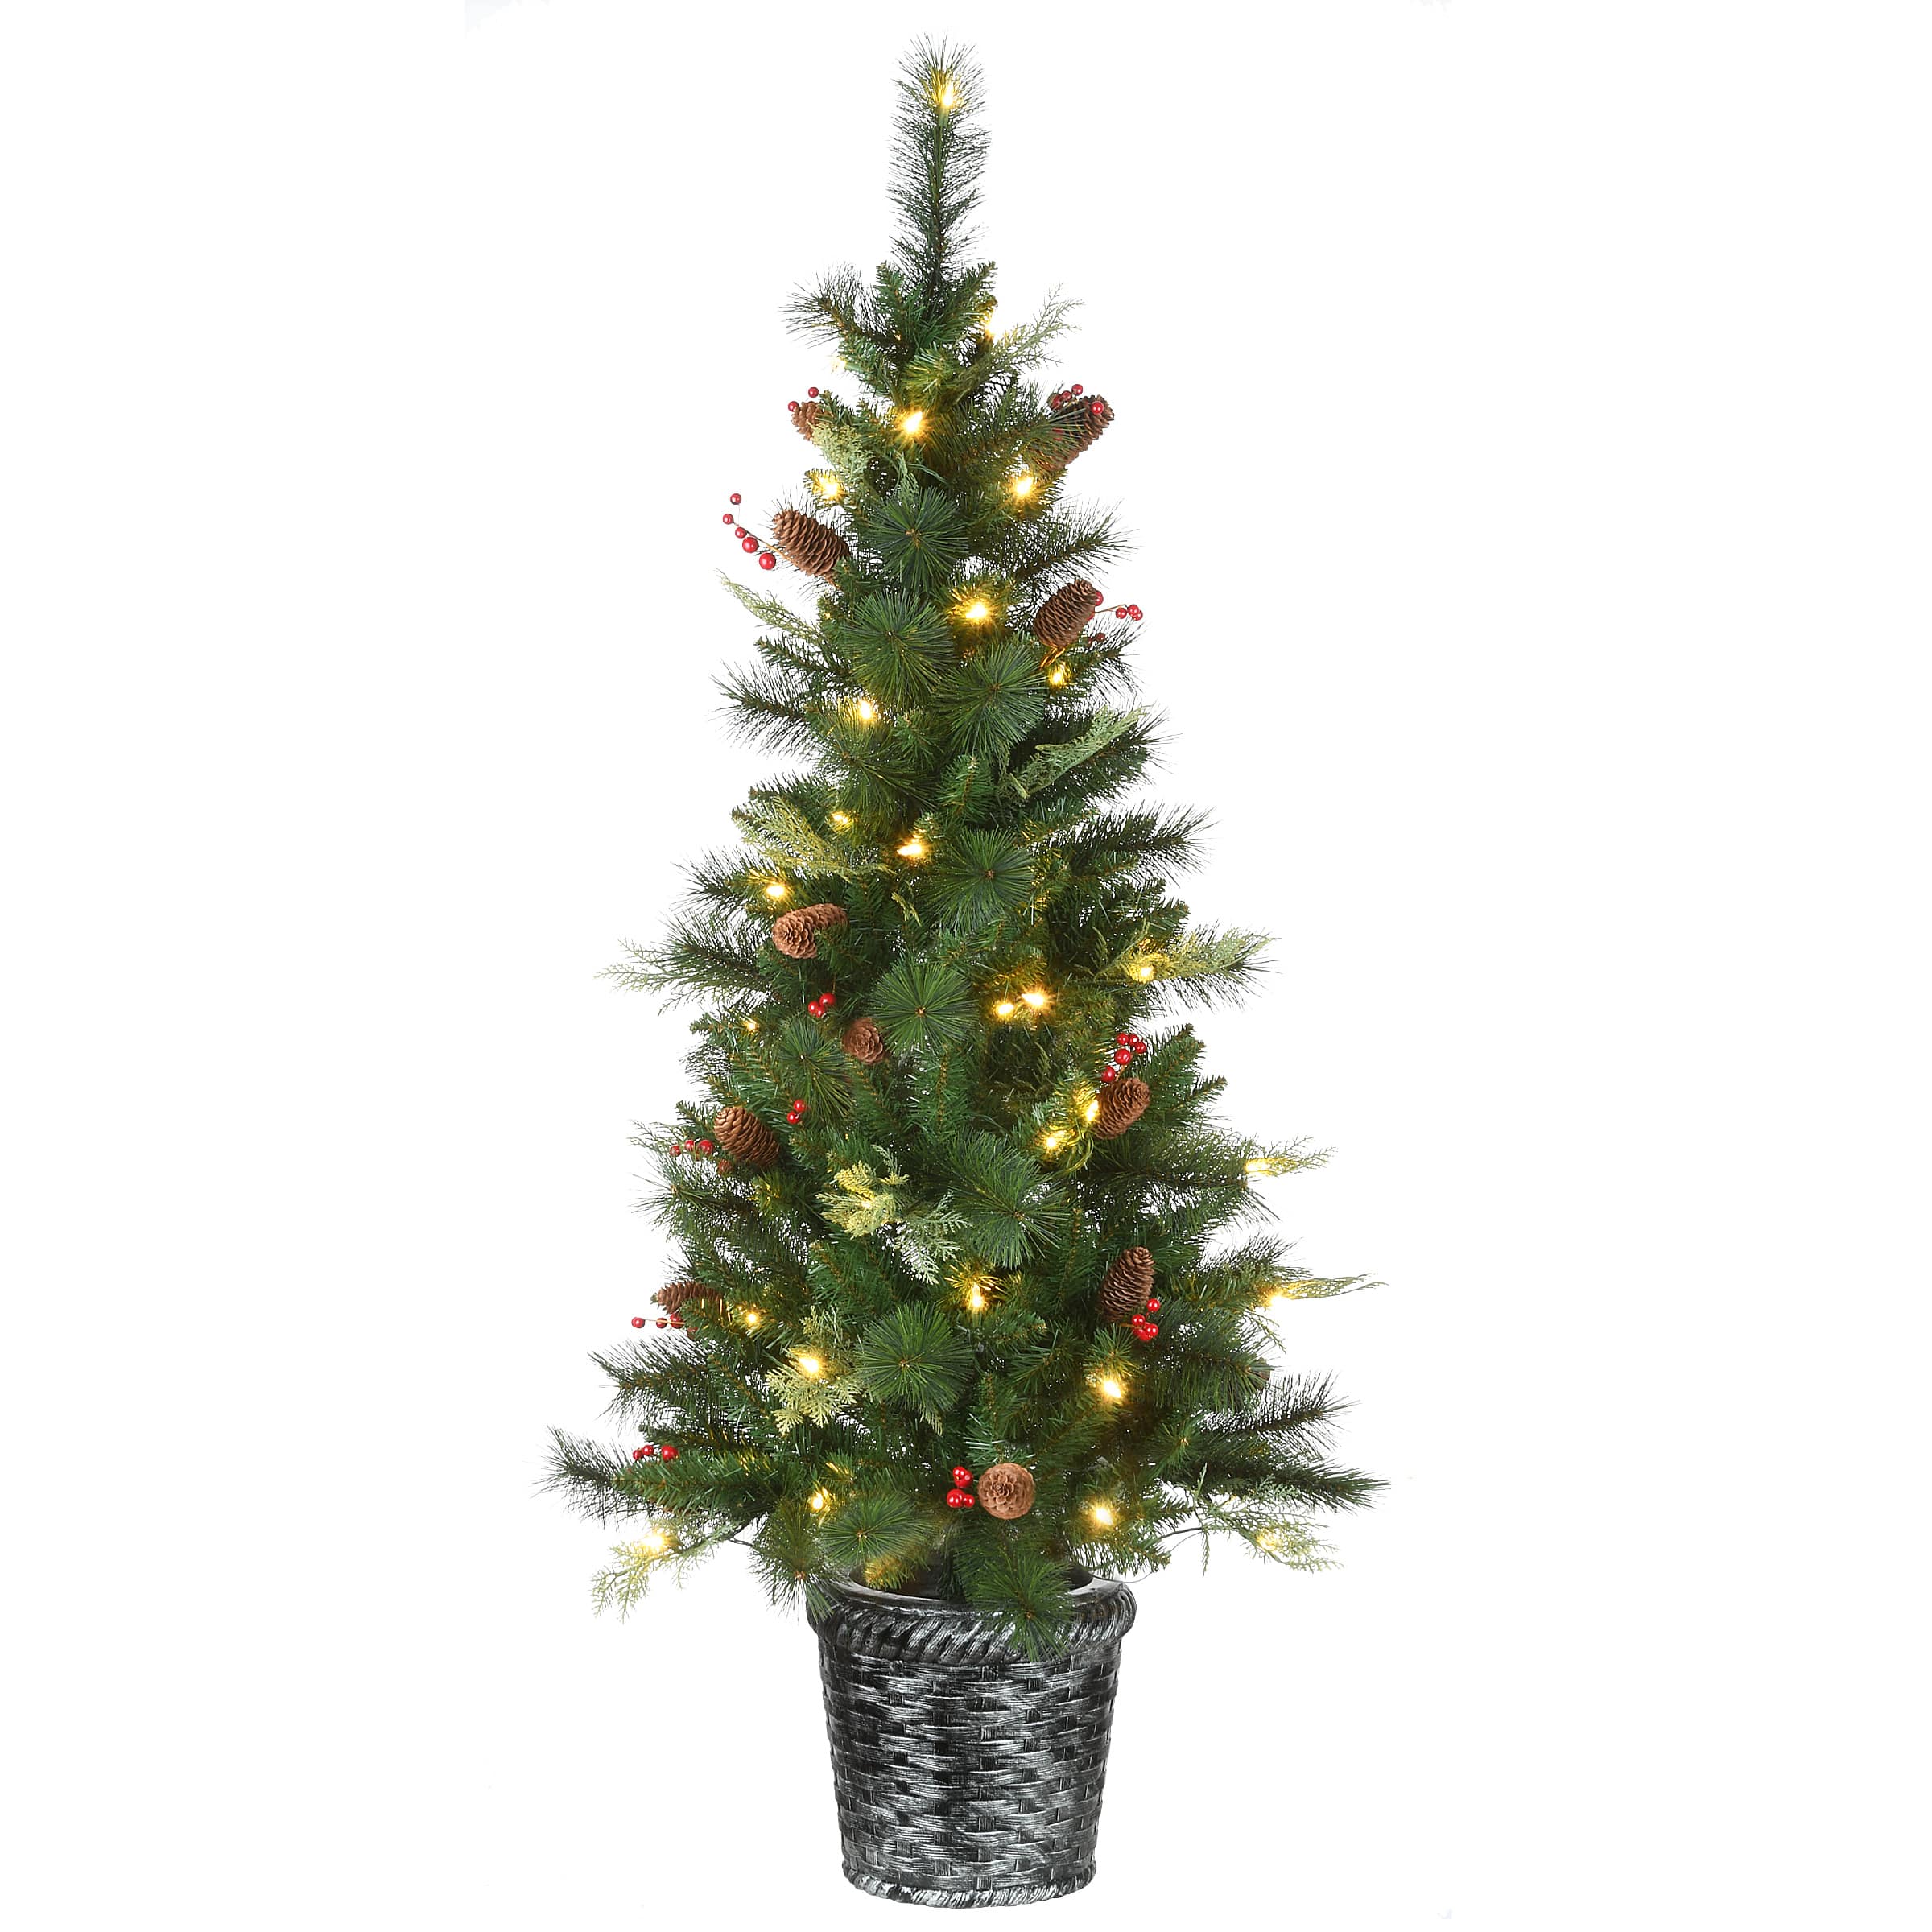 5ft. Buzzard Pine Artificial Christmas Tree in Woven Planter, Warm White LED Lights